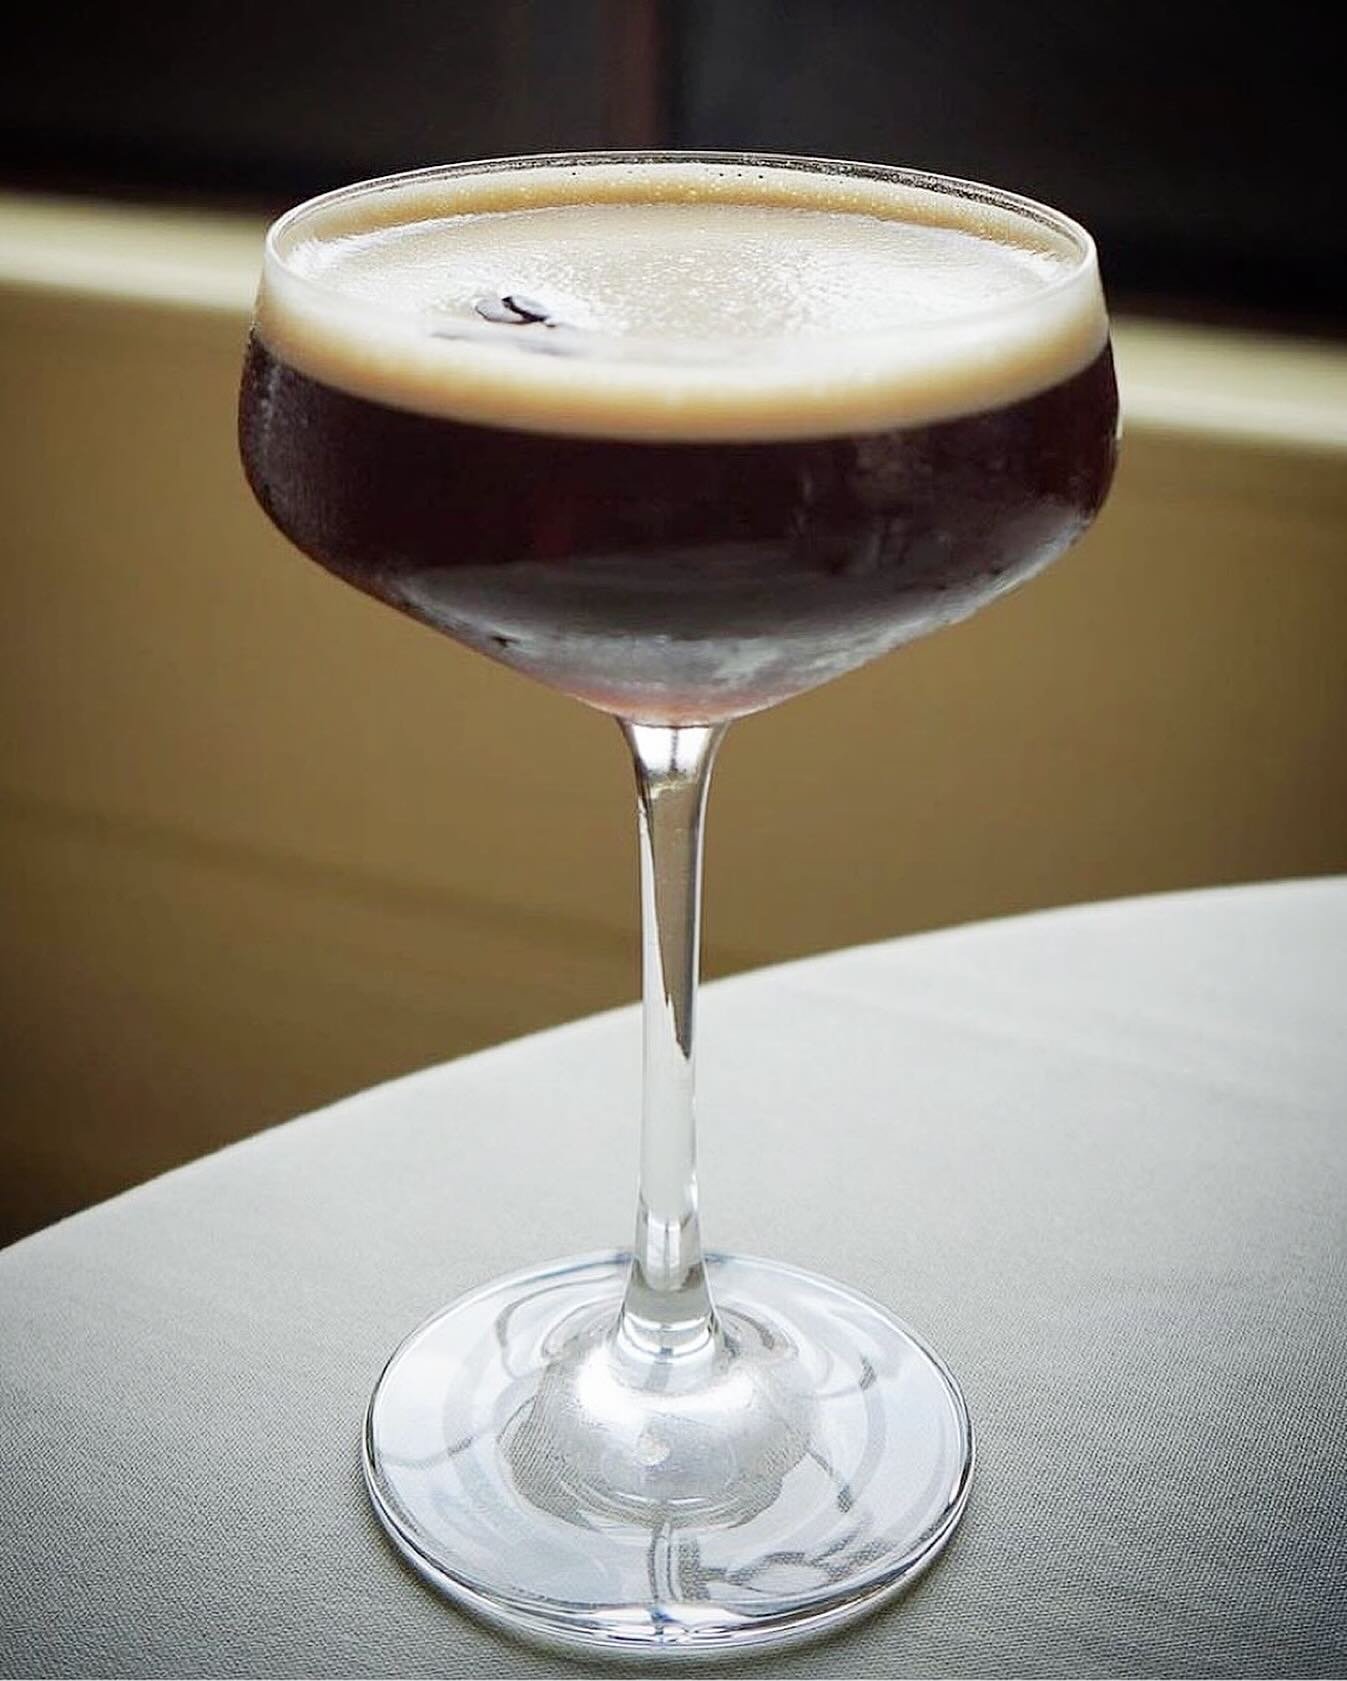 Ciao Orlando! ✨🇮🇹 #thursdayvibes

Get ready for a burst of flavor with our Espresso Martini cocktail. ☕🍸 This invigorating mix combines vodka, 
rich espresso, coffee liqueur, and a hint of simple syrup for a truly electrifying taste. #espressolove